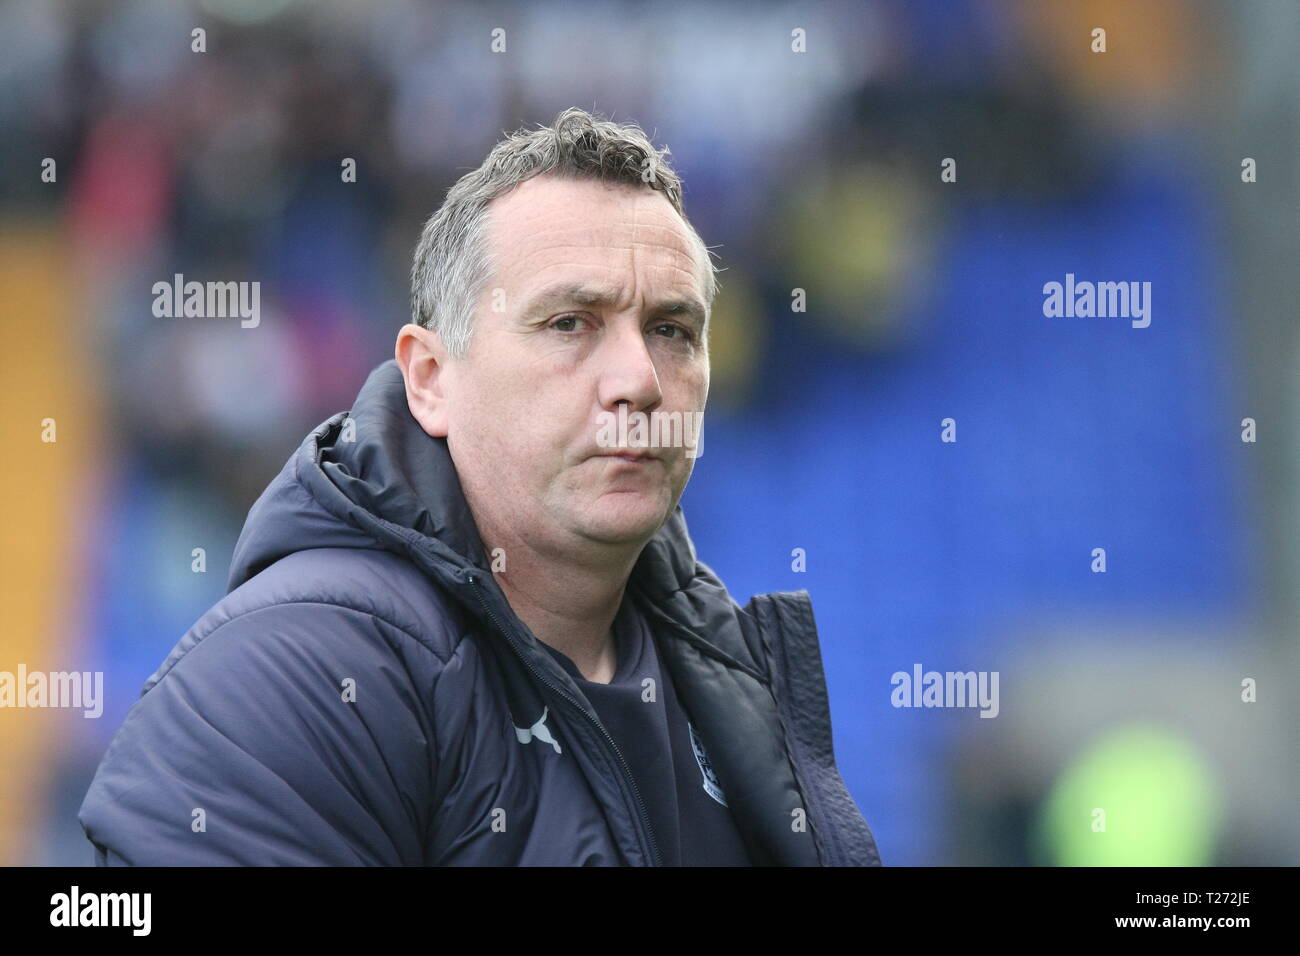 Birkenhead, Wirral, UK. 30th March, 2019. Tranmere Rovers Manager Micky Mellon ahead of the EFL League Two match with Carlisle United at Prenton Park which Tranmere Rovers won 3-0. Stock Photo